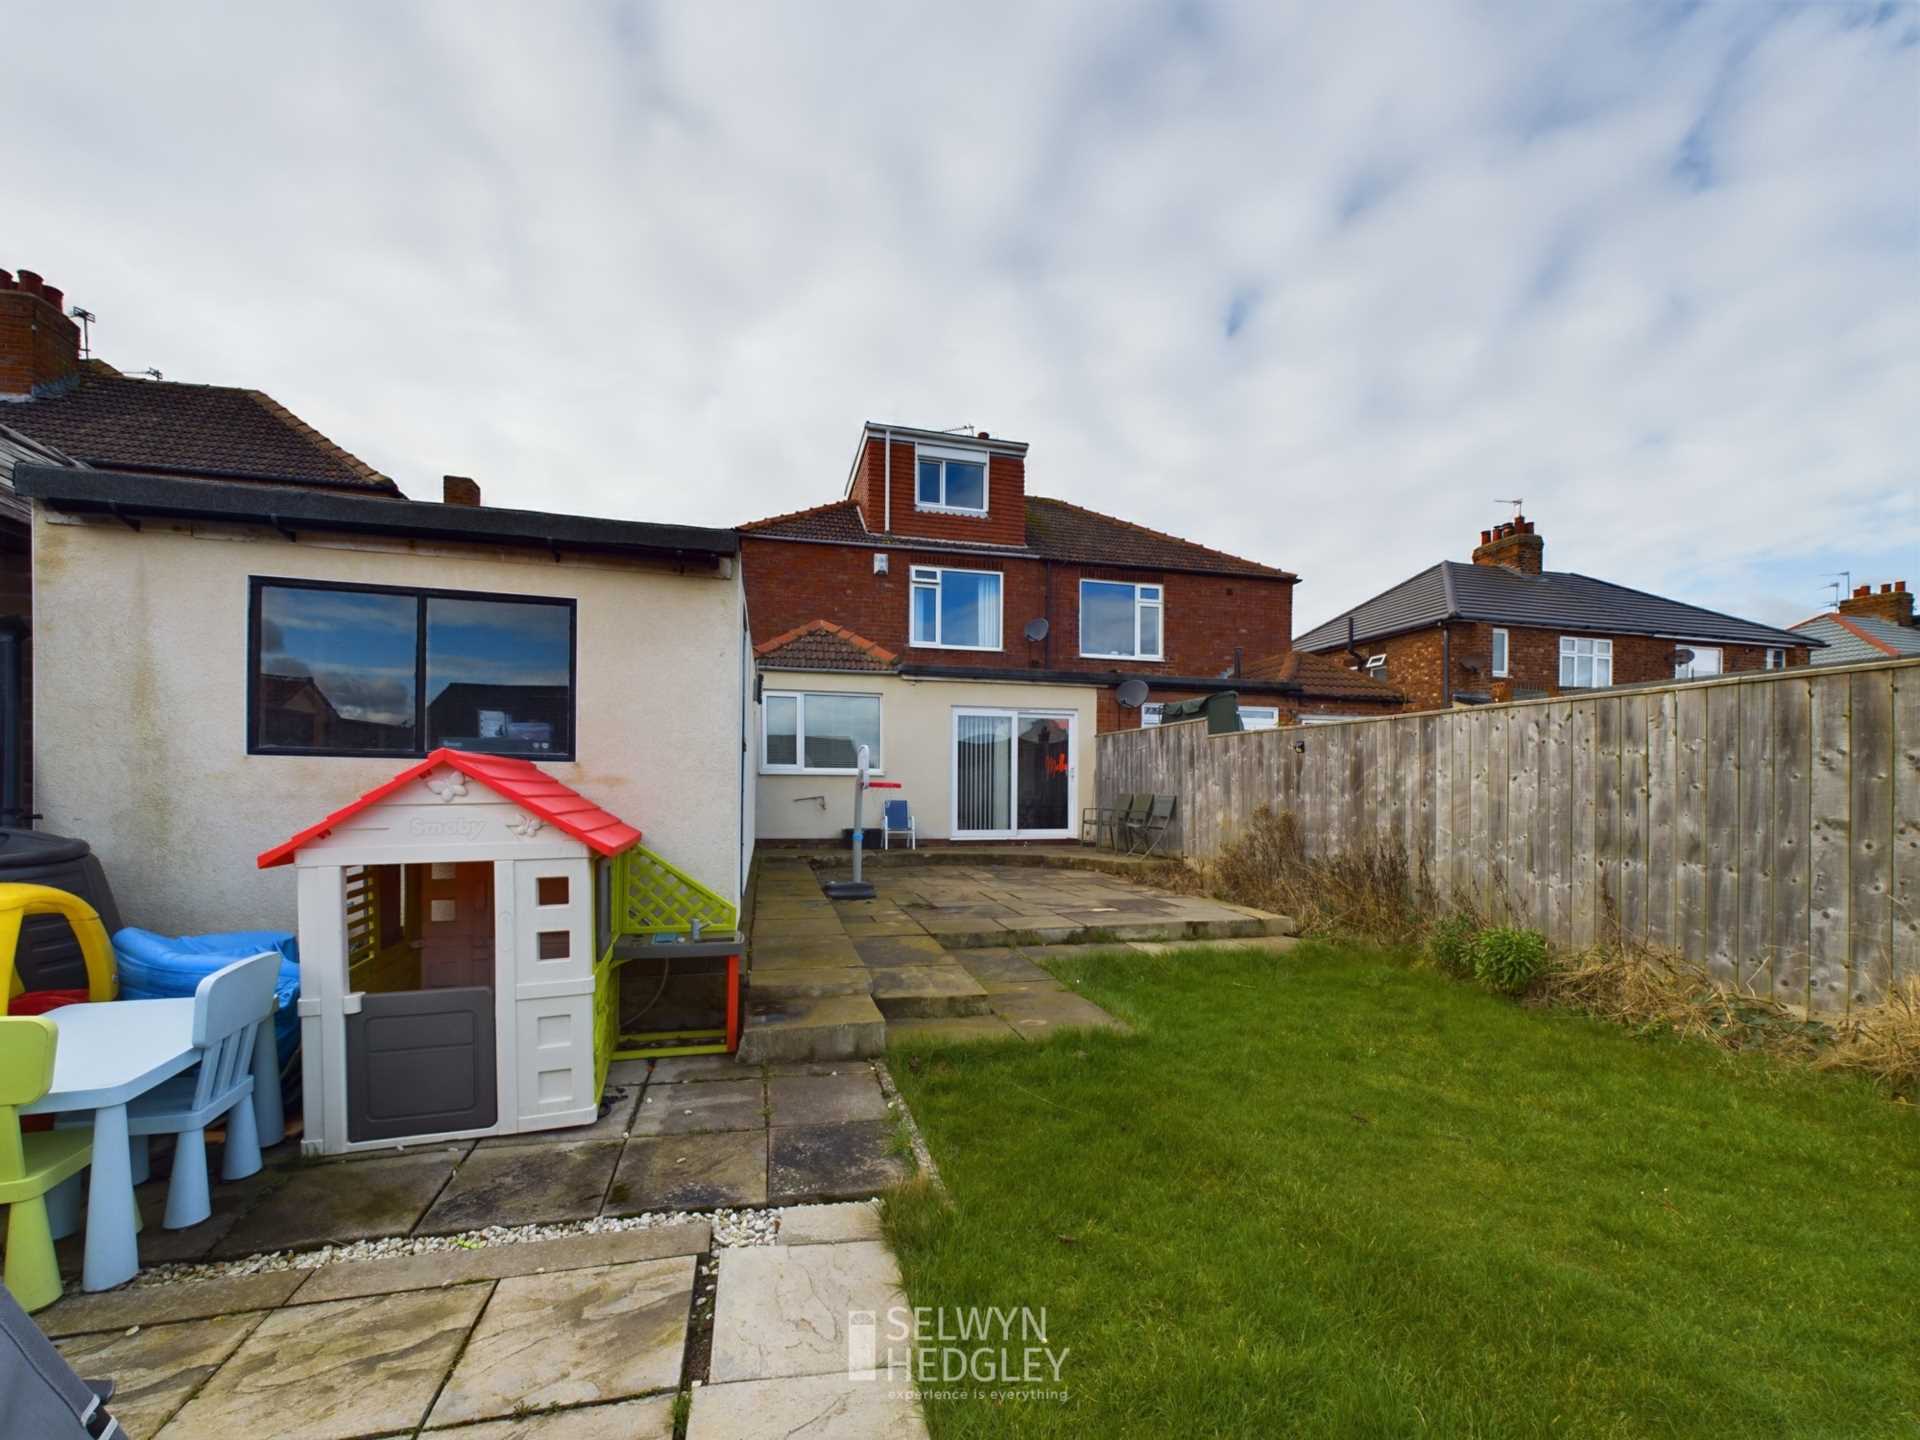 Raby Road, Redcar, Image 25